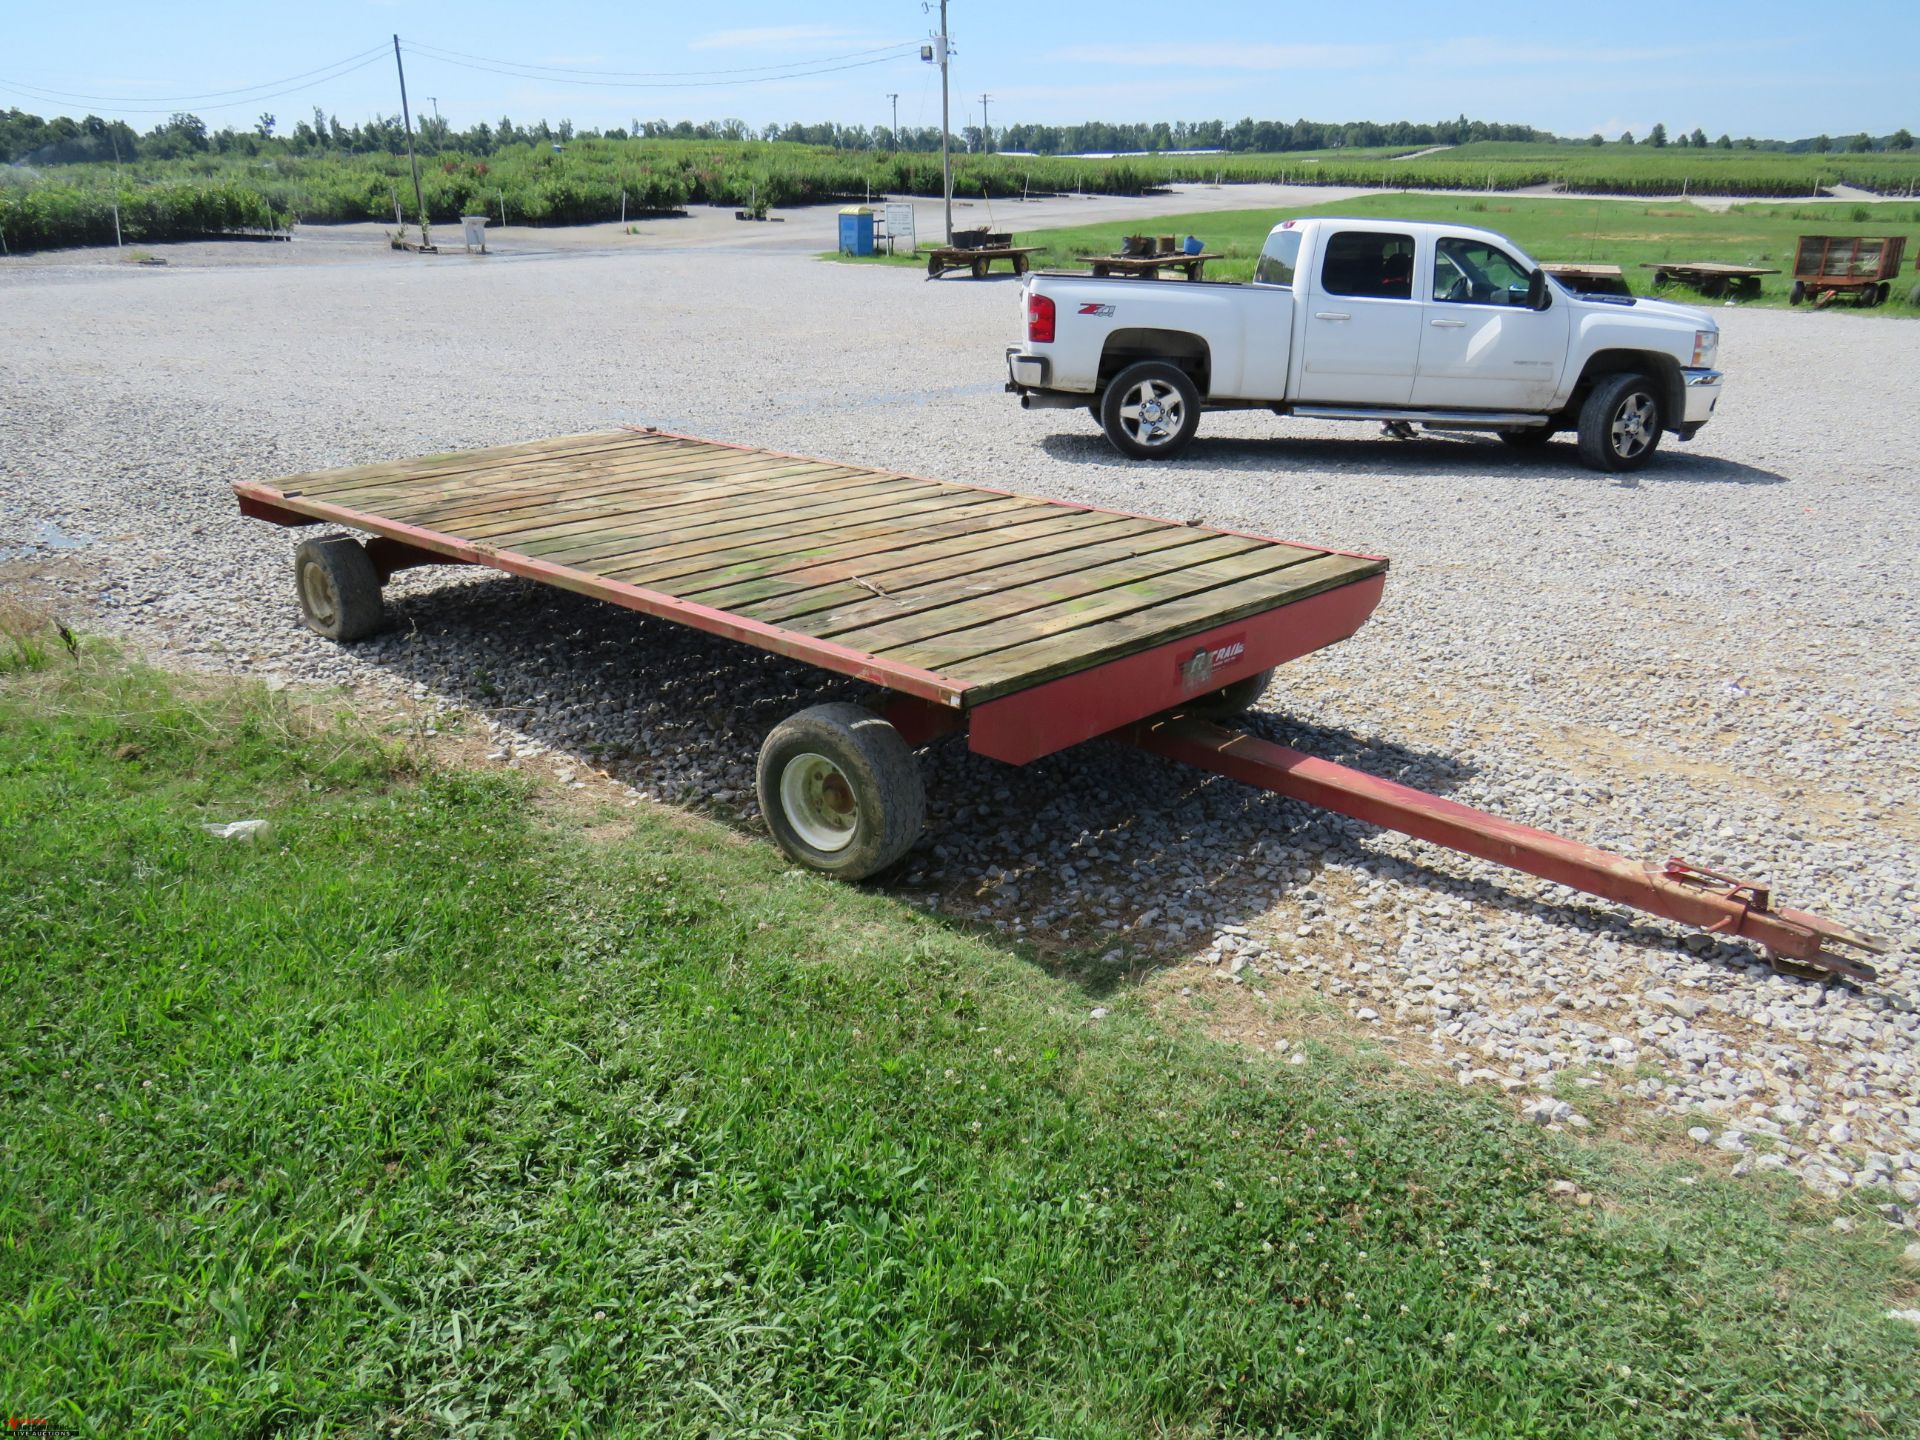 EZ TRAIL FLAT BED TRAILER, 15', PIN HITCH, SMALL TIRES - Image 2 of 6